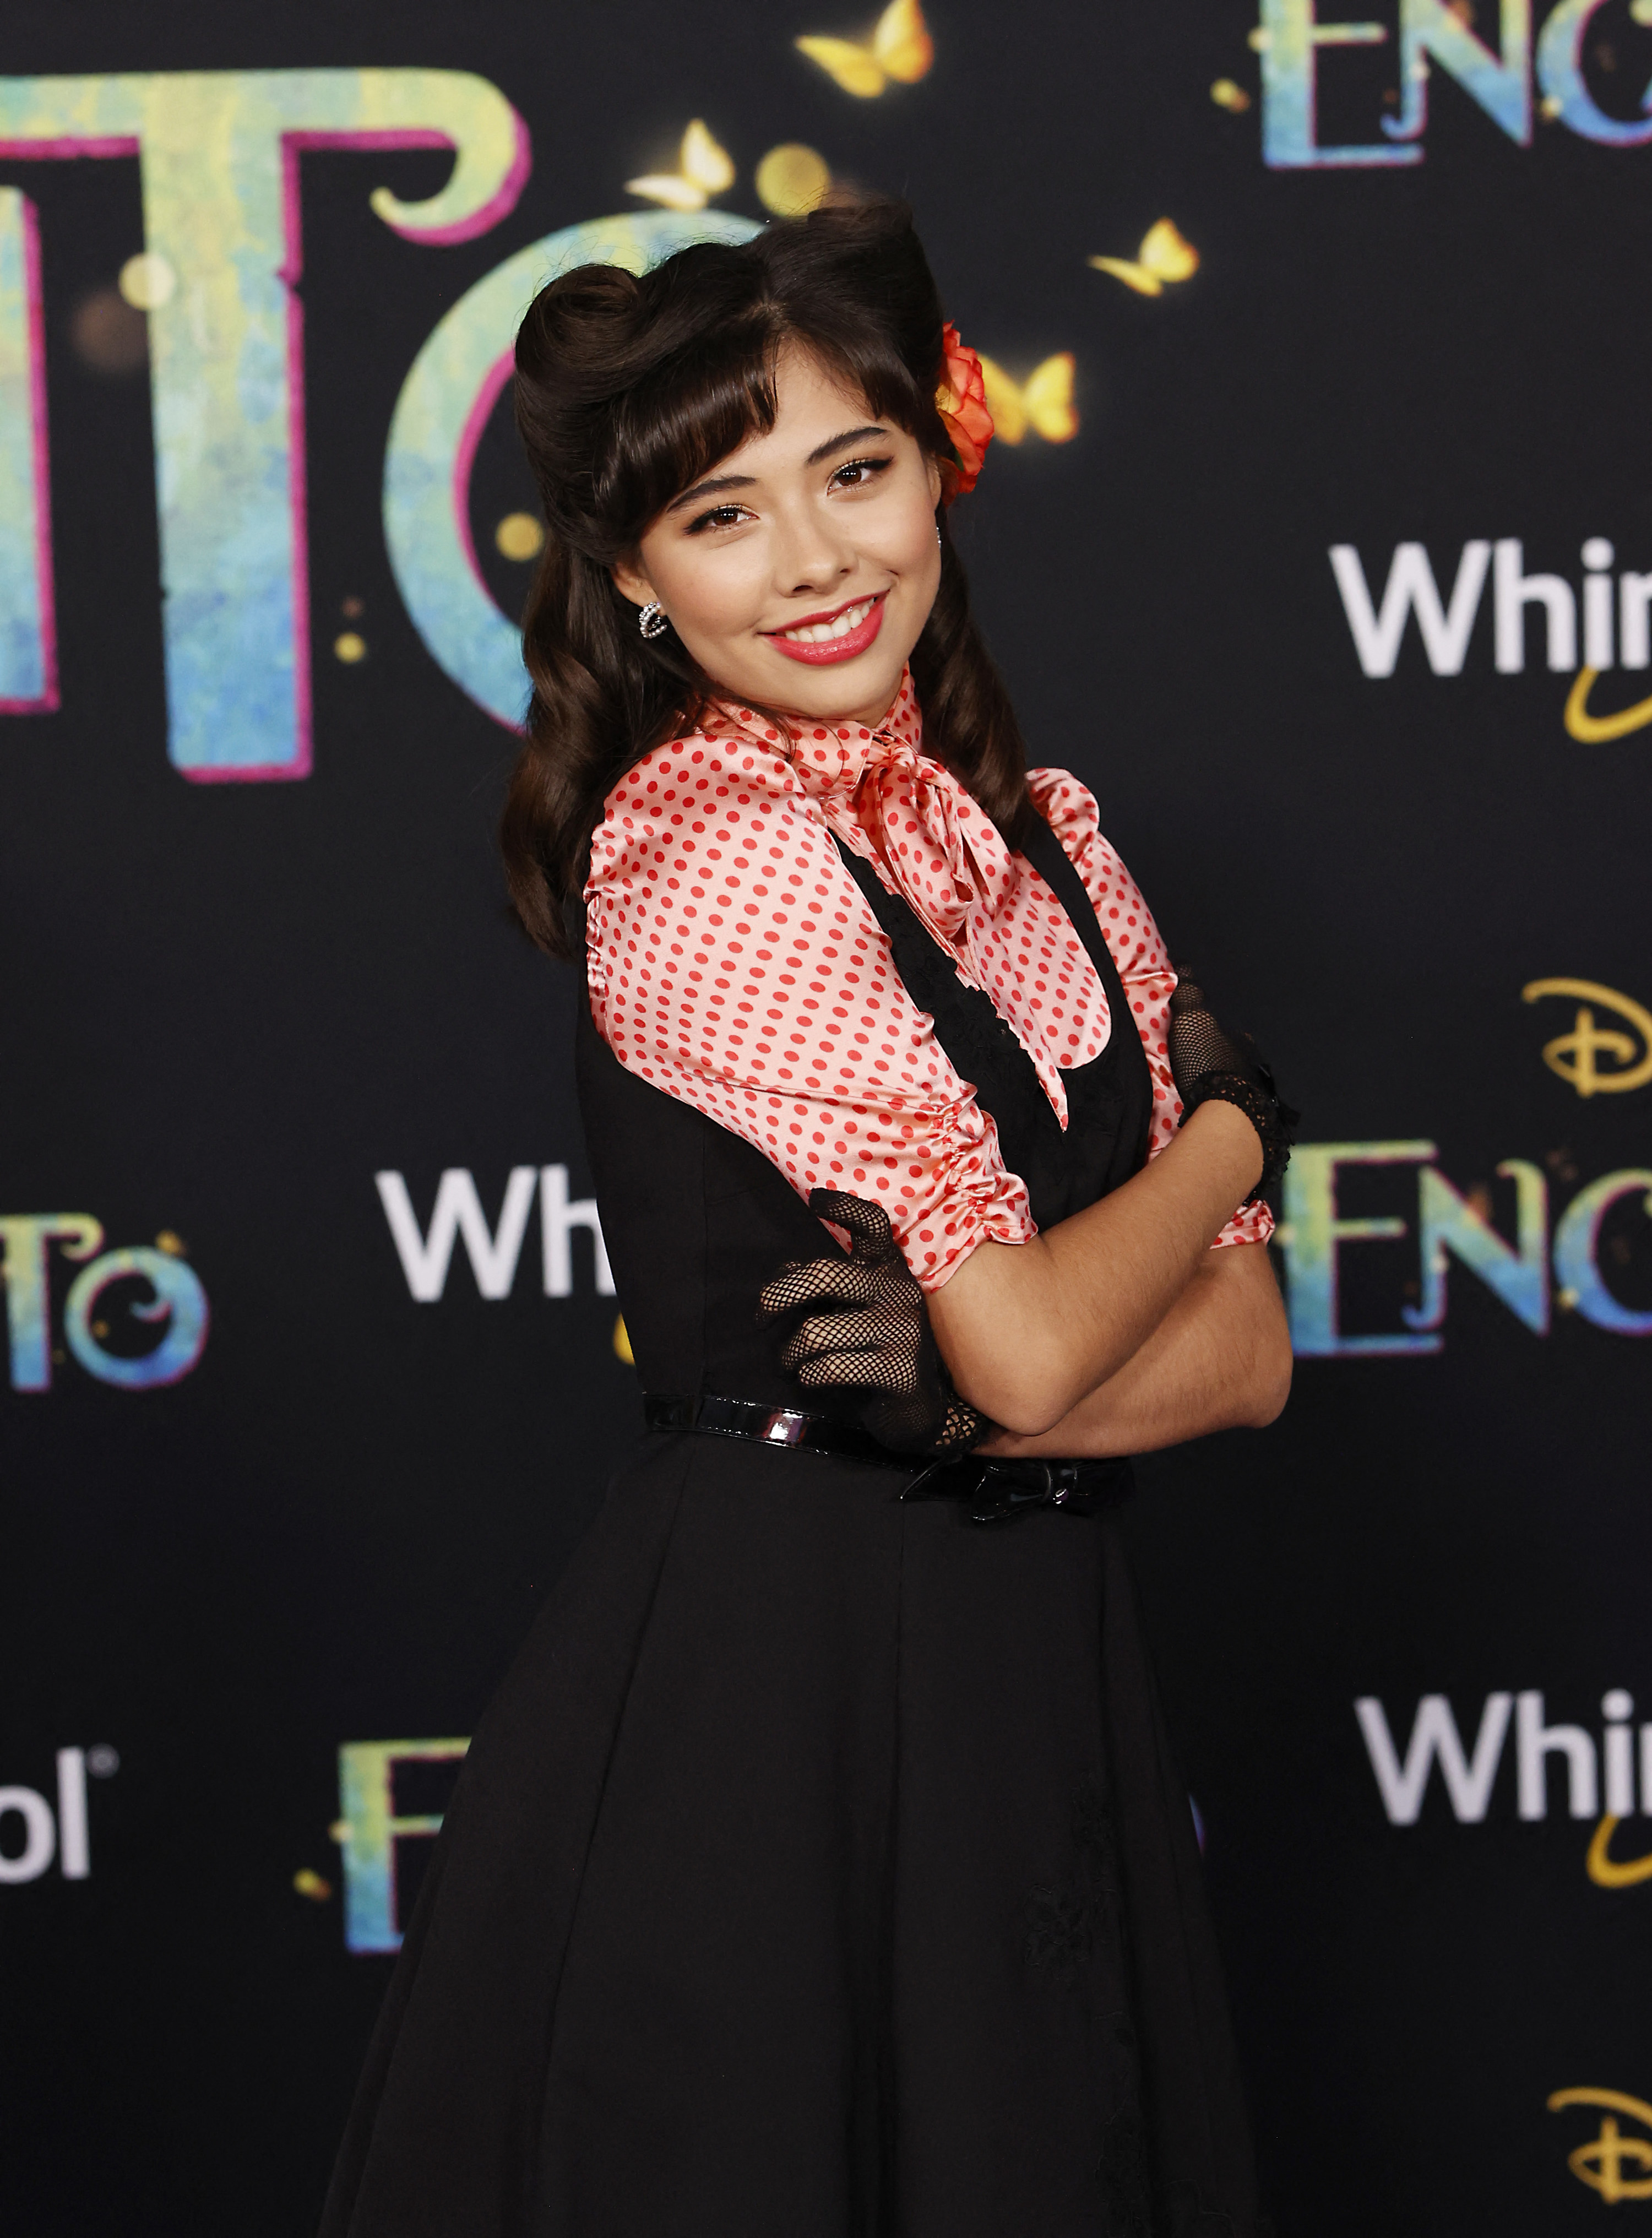 Xohitl Gomez on the red carpet